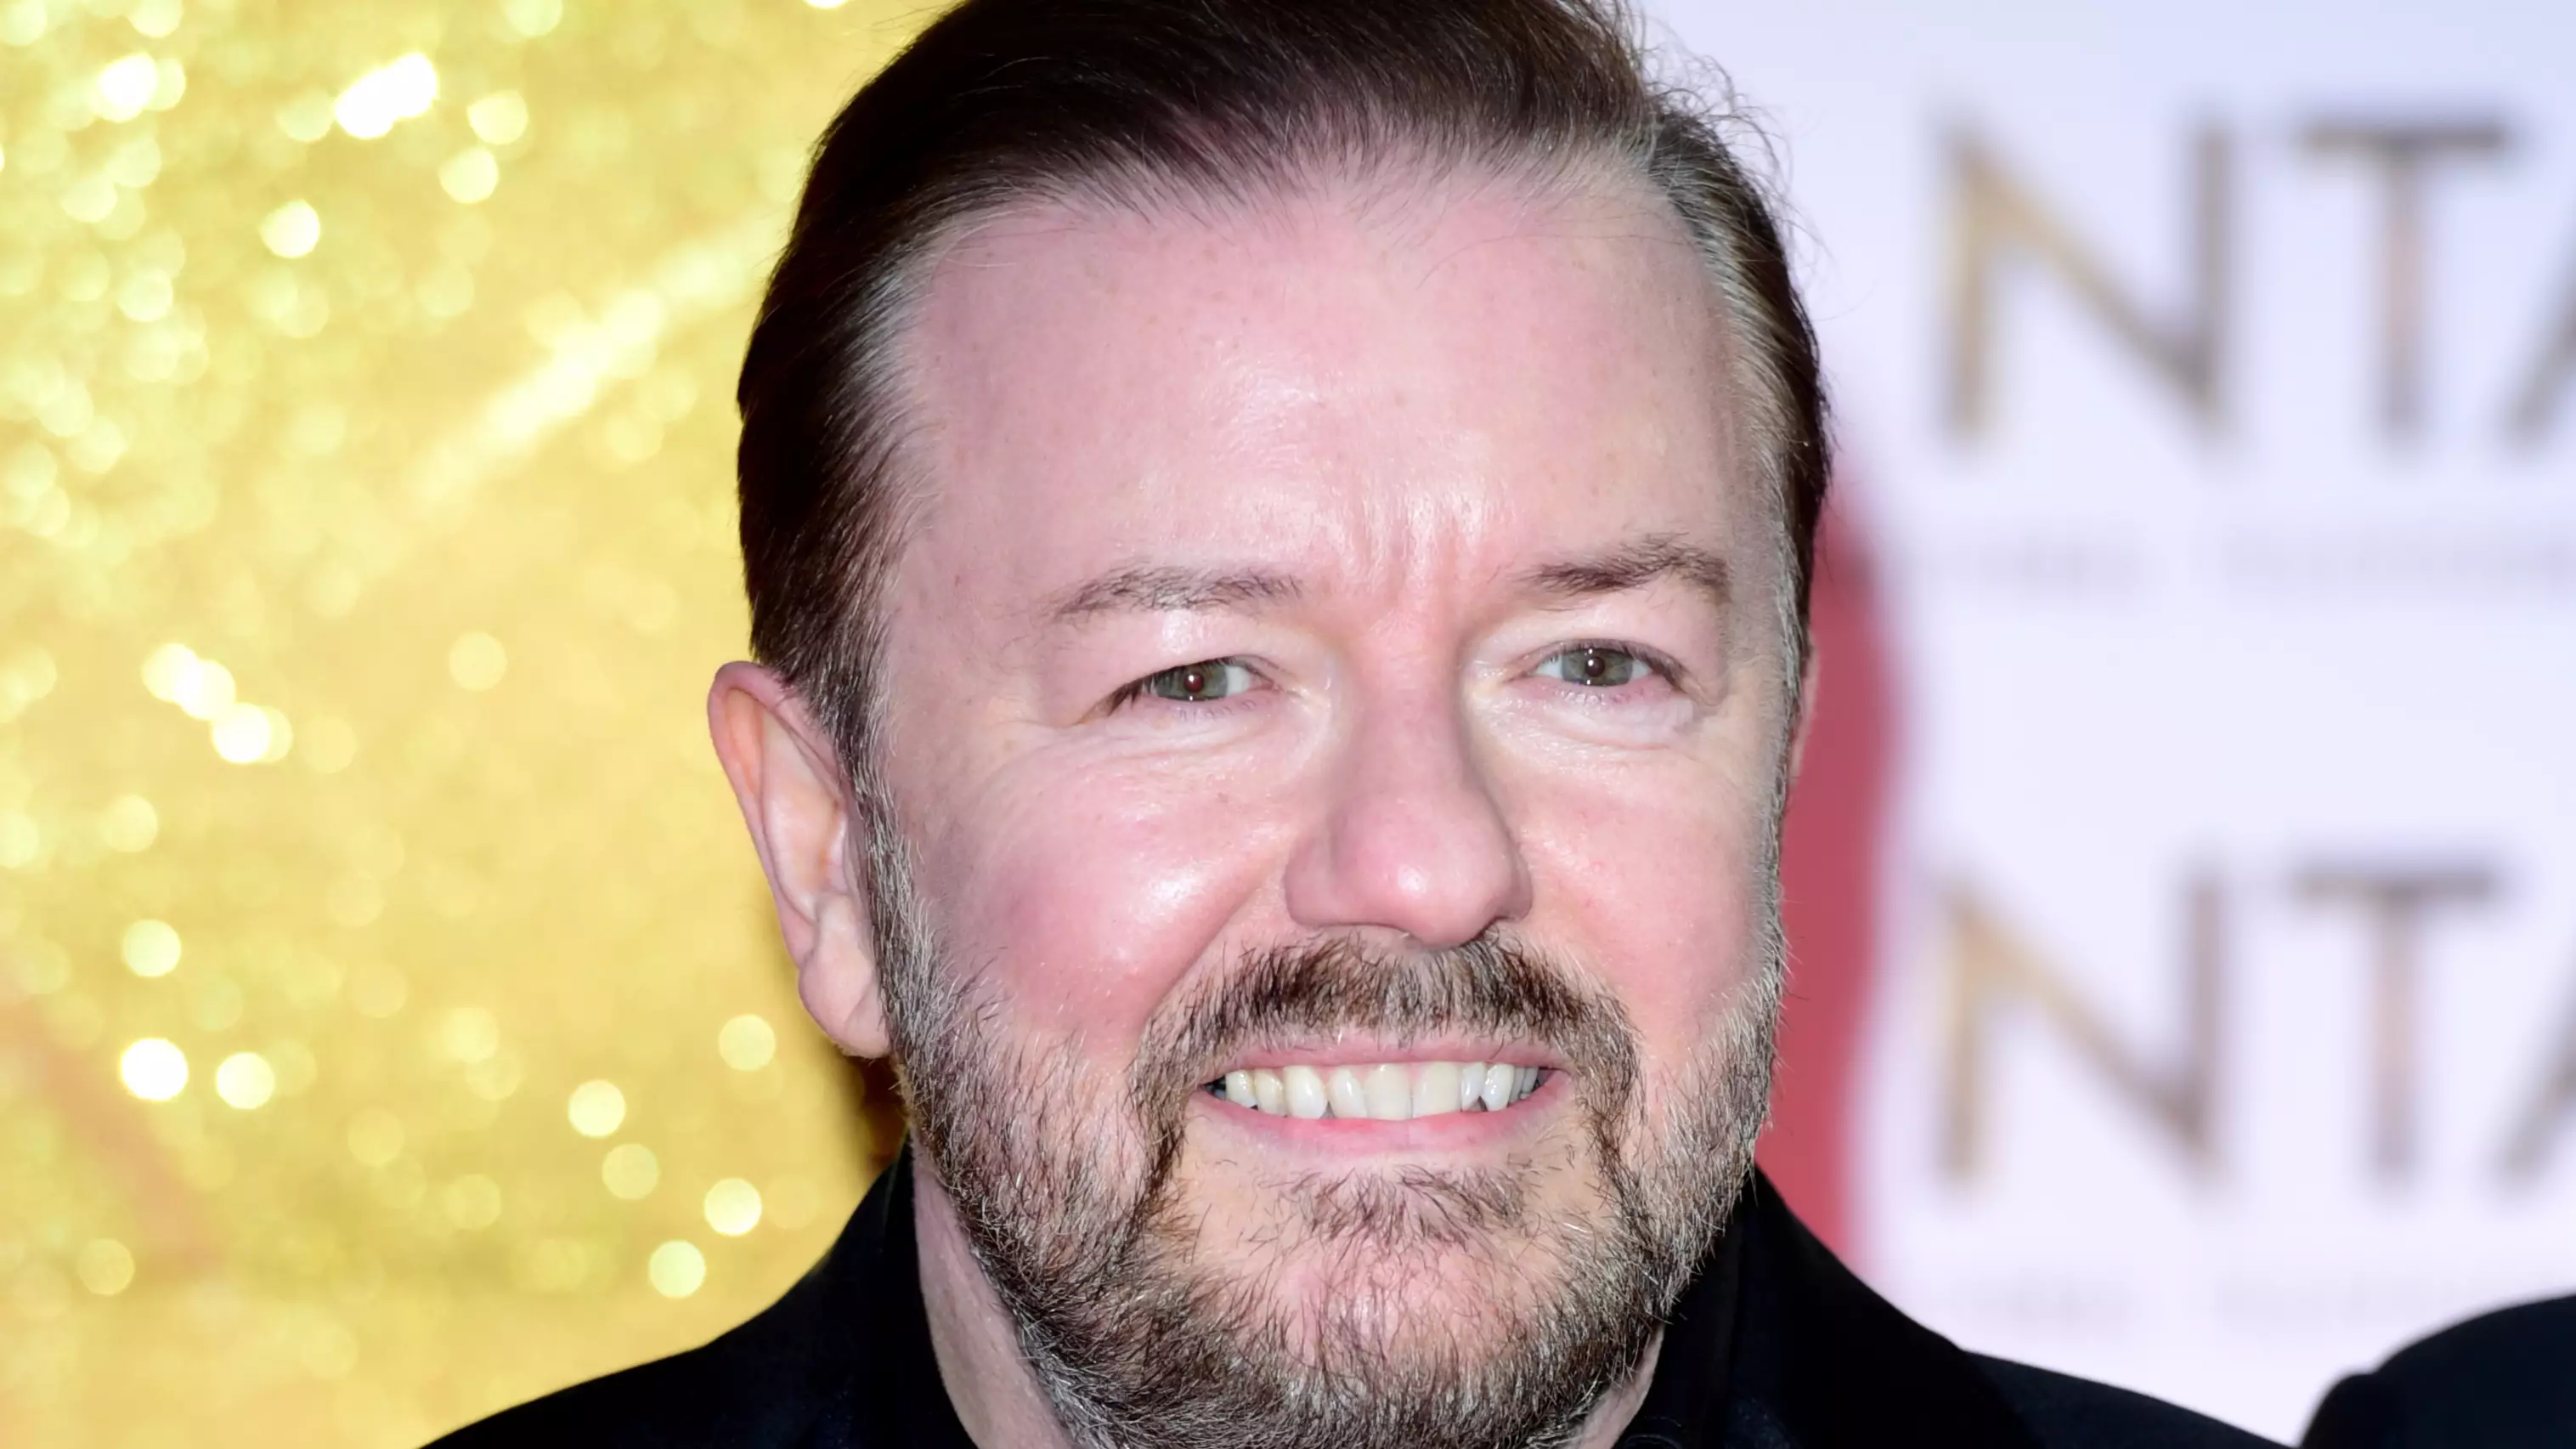 Ricky Gervais Wants To Be Fed To Lions When He Dies To ‘Give Something Back’